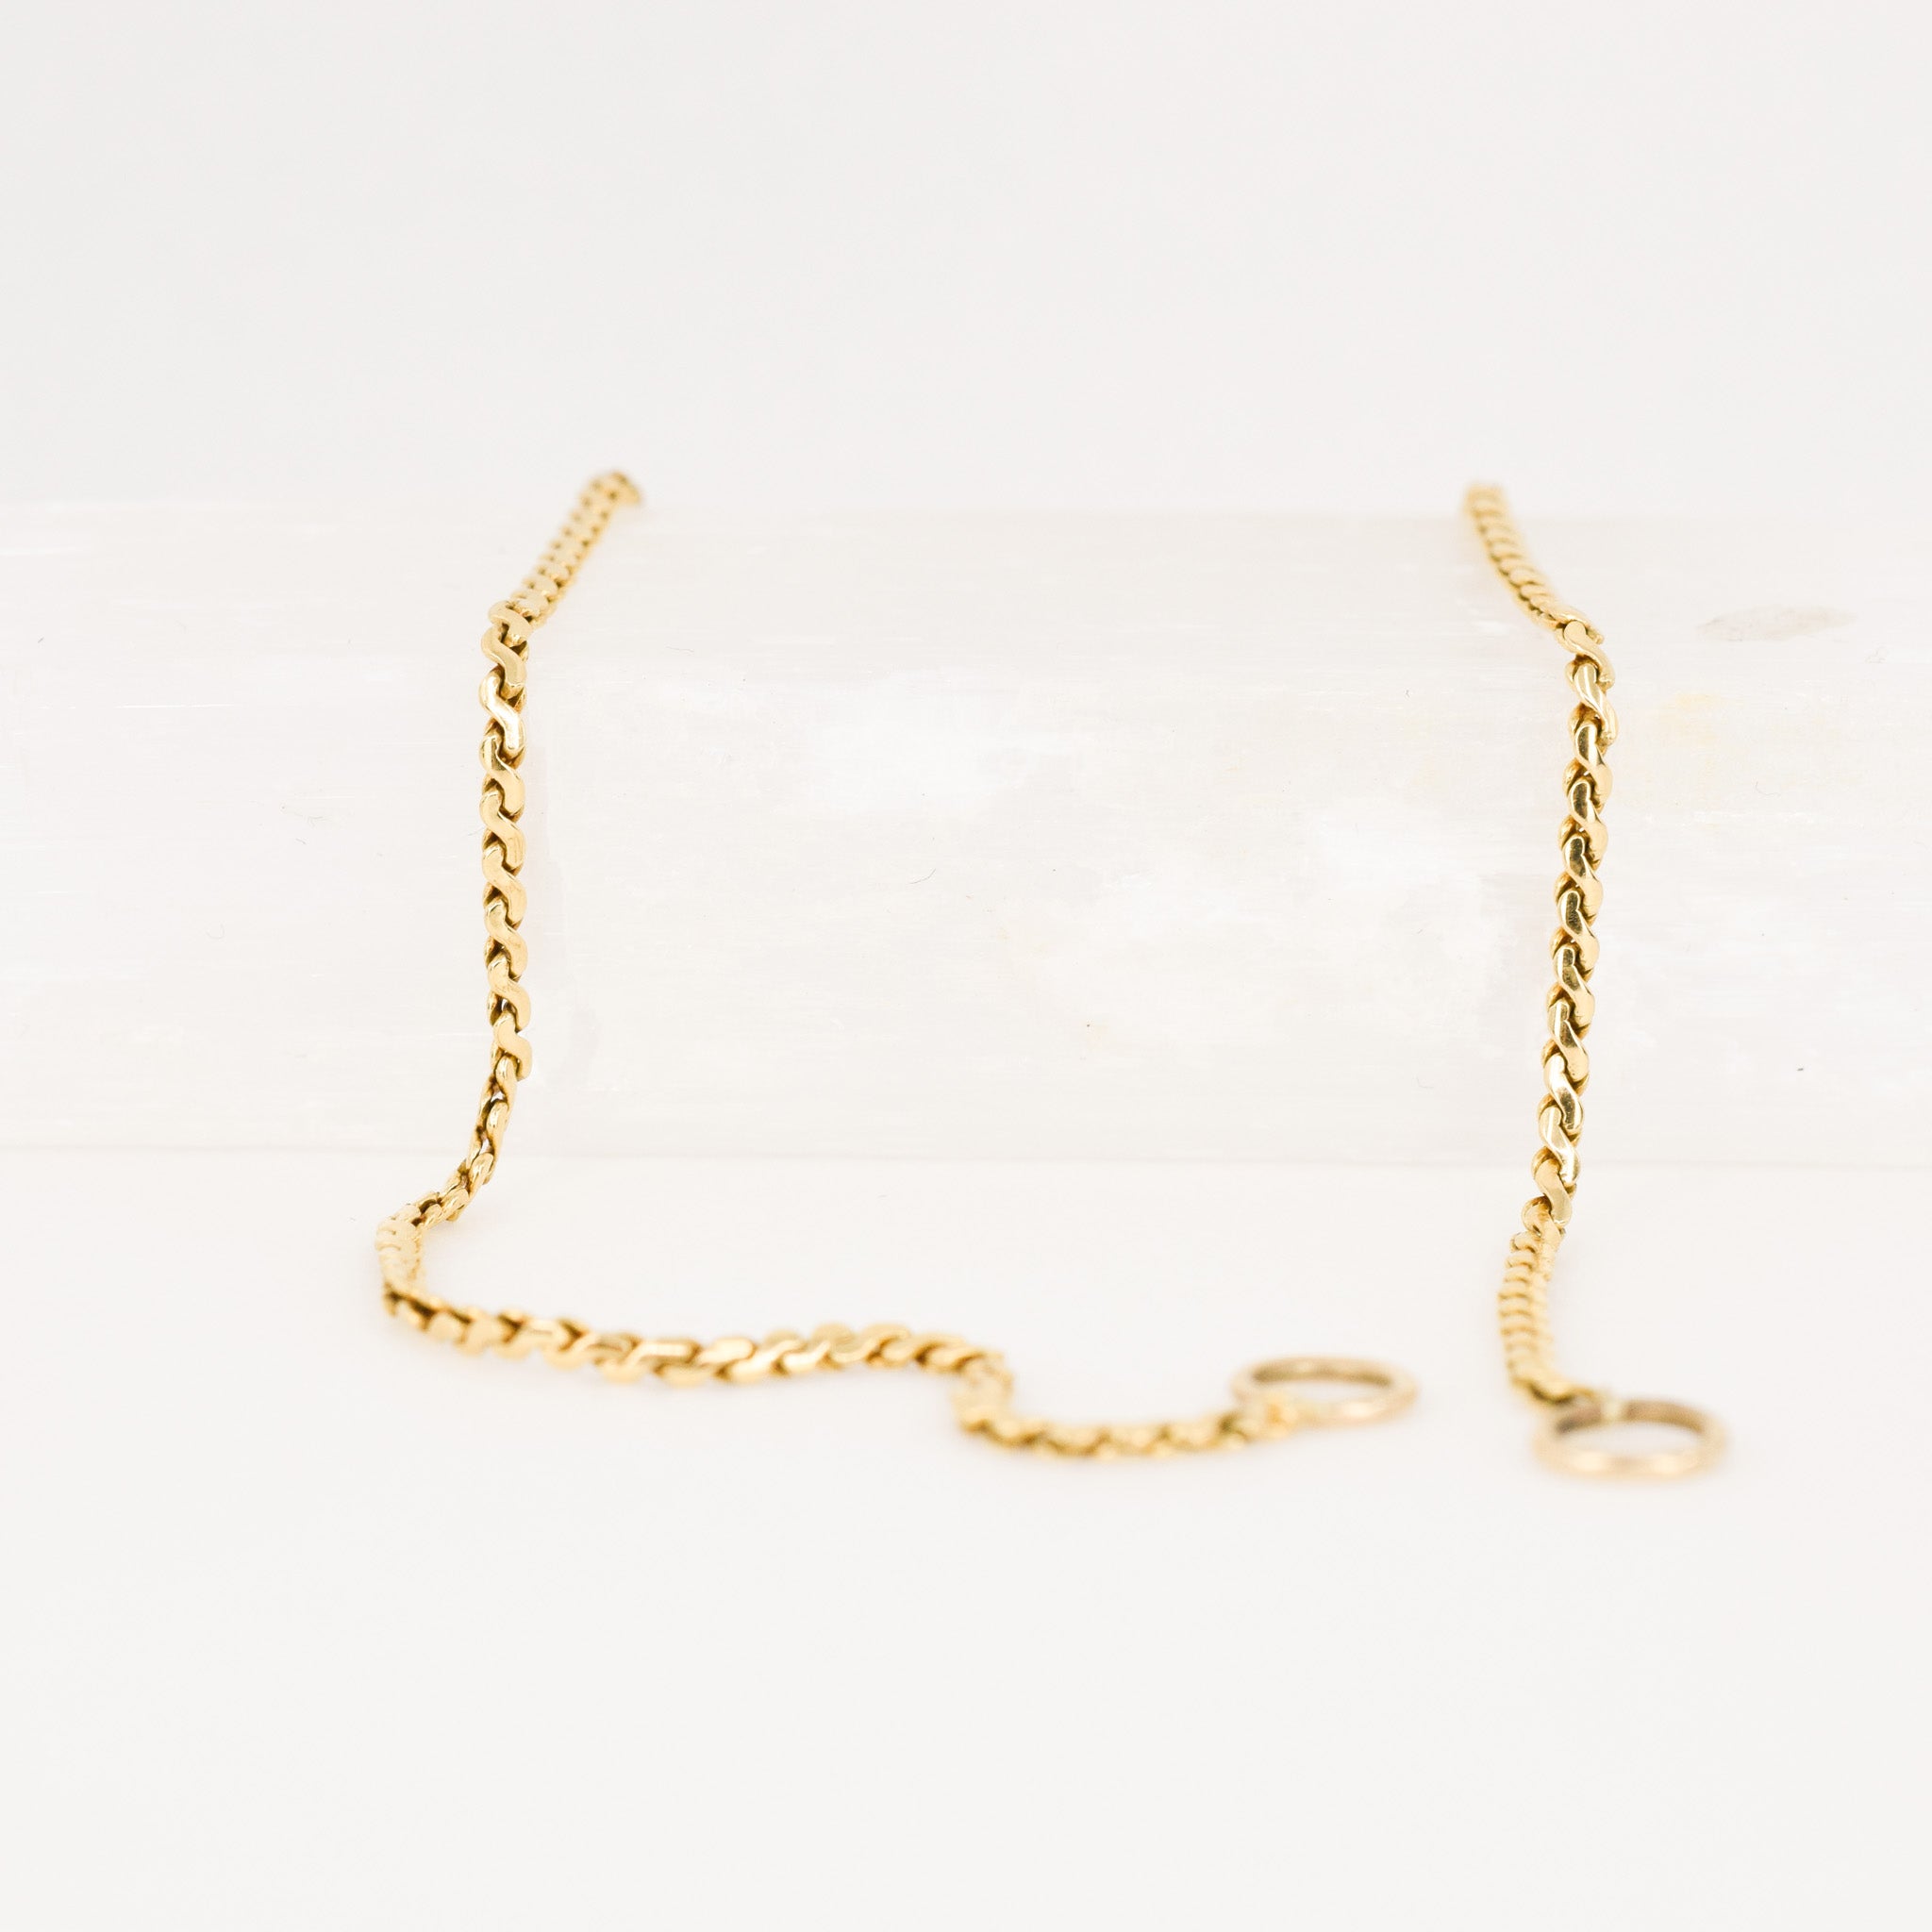 Fine gold 18k buttery chain necklace with loop ends, folklor vintage jewelry canada